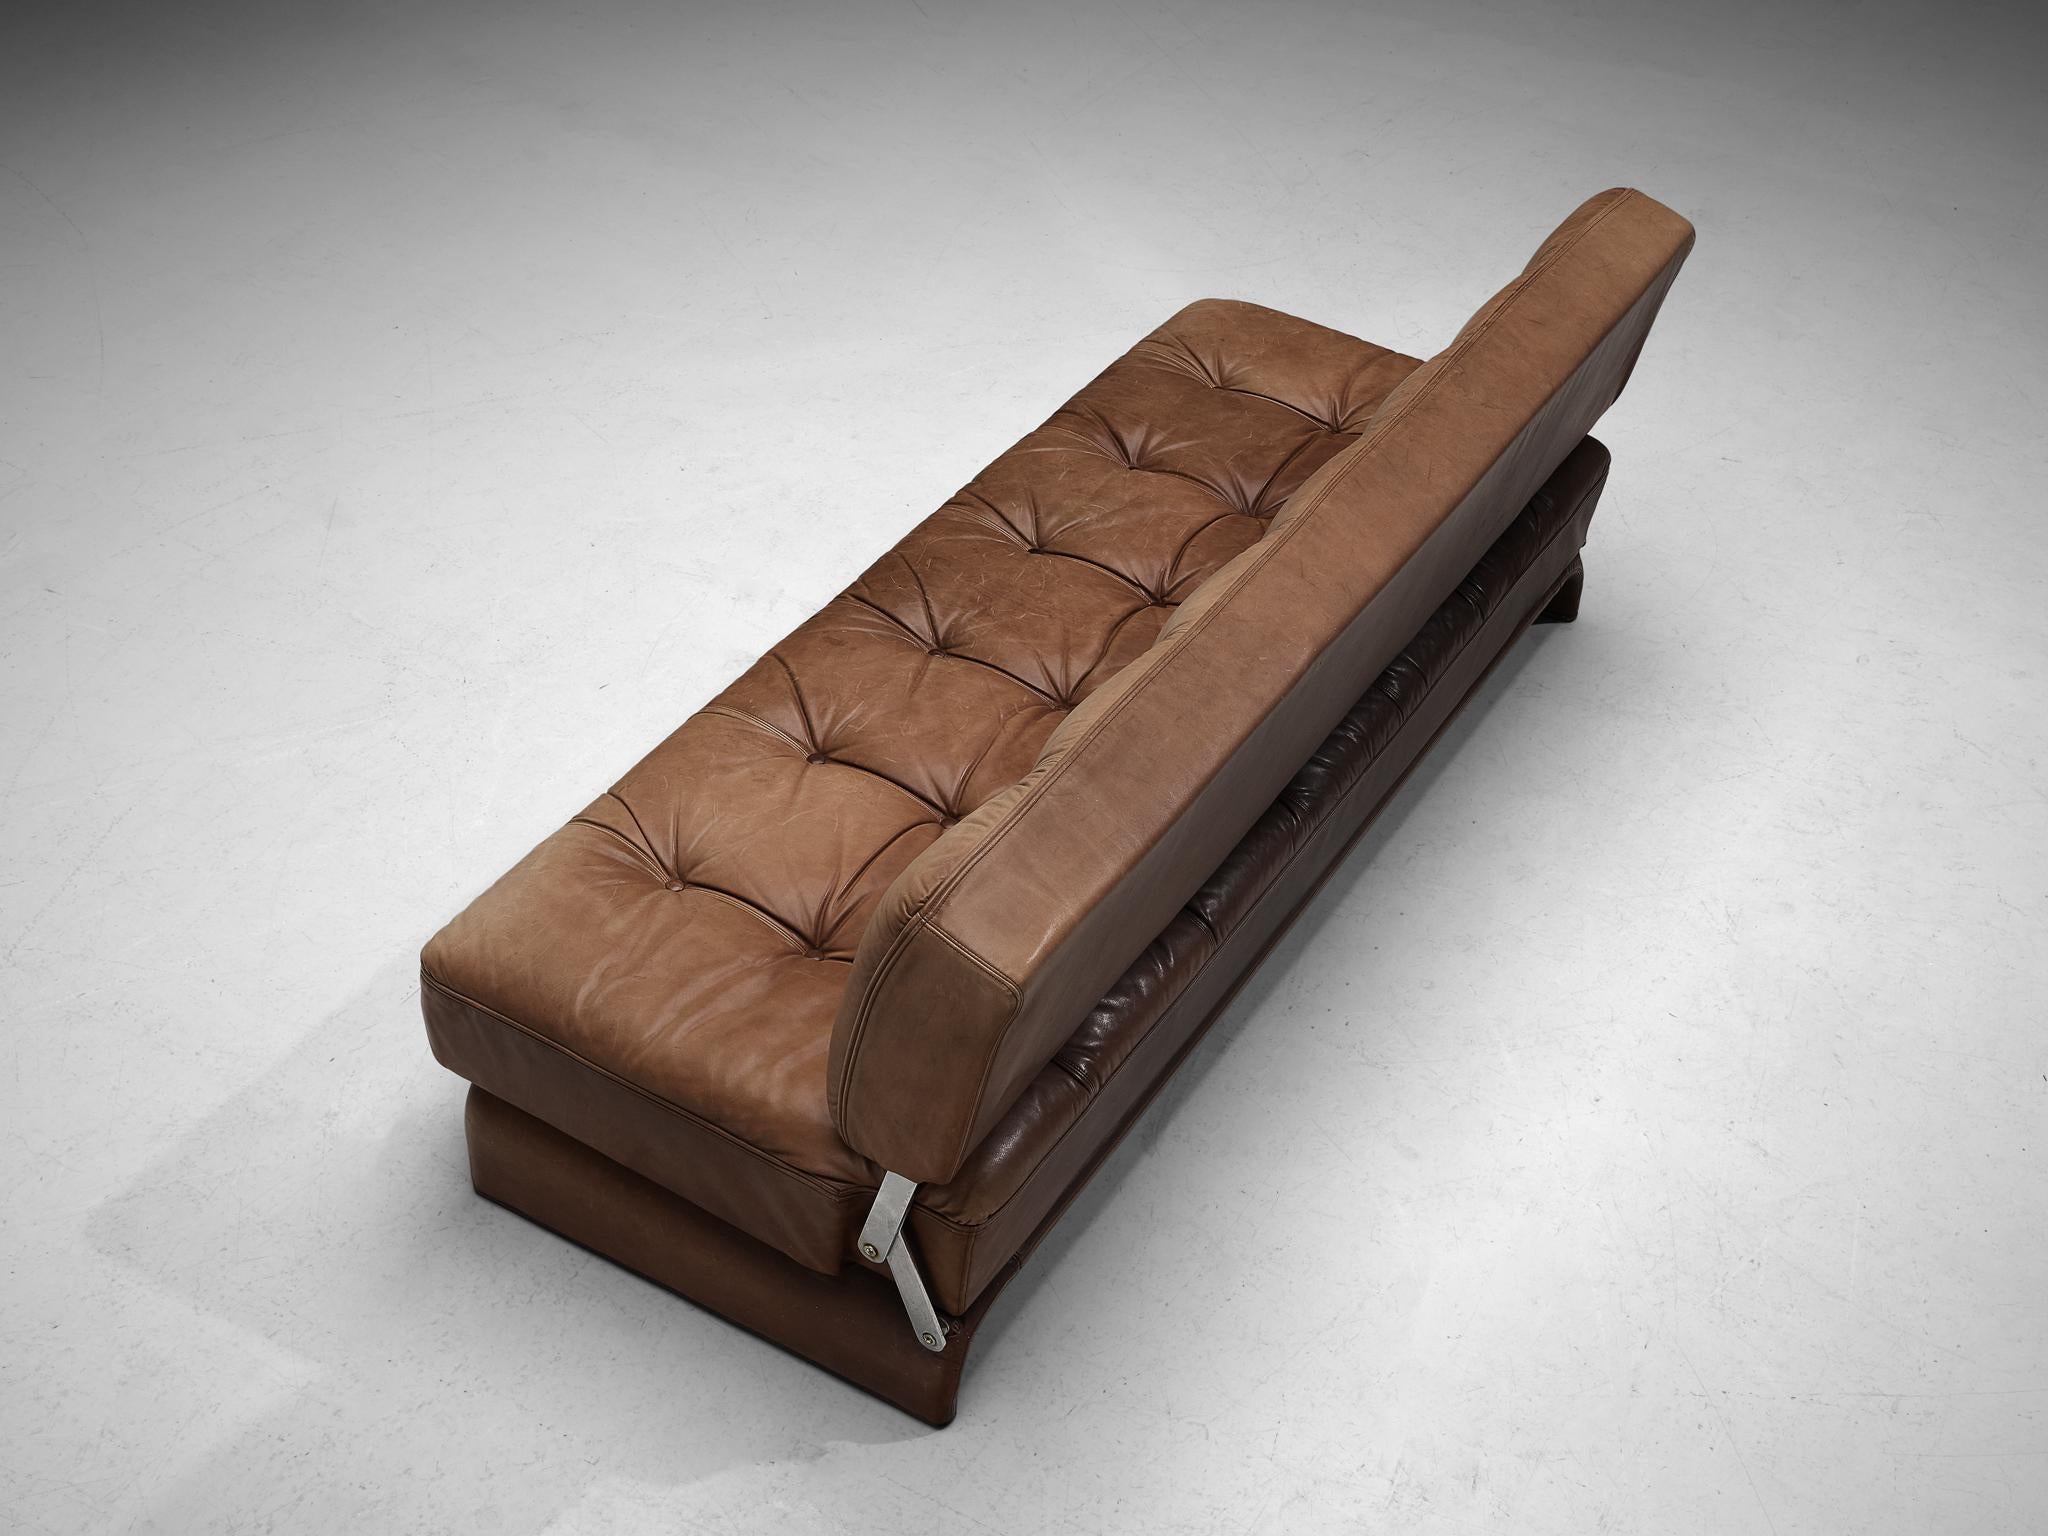 Mid-20th Century Johannes Spalt for Wittmann 'Constanze' Sofa in Cognac Leather  For Sale